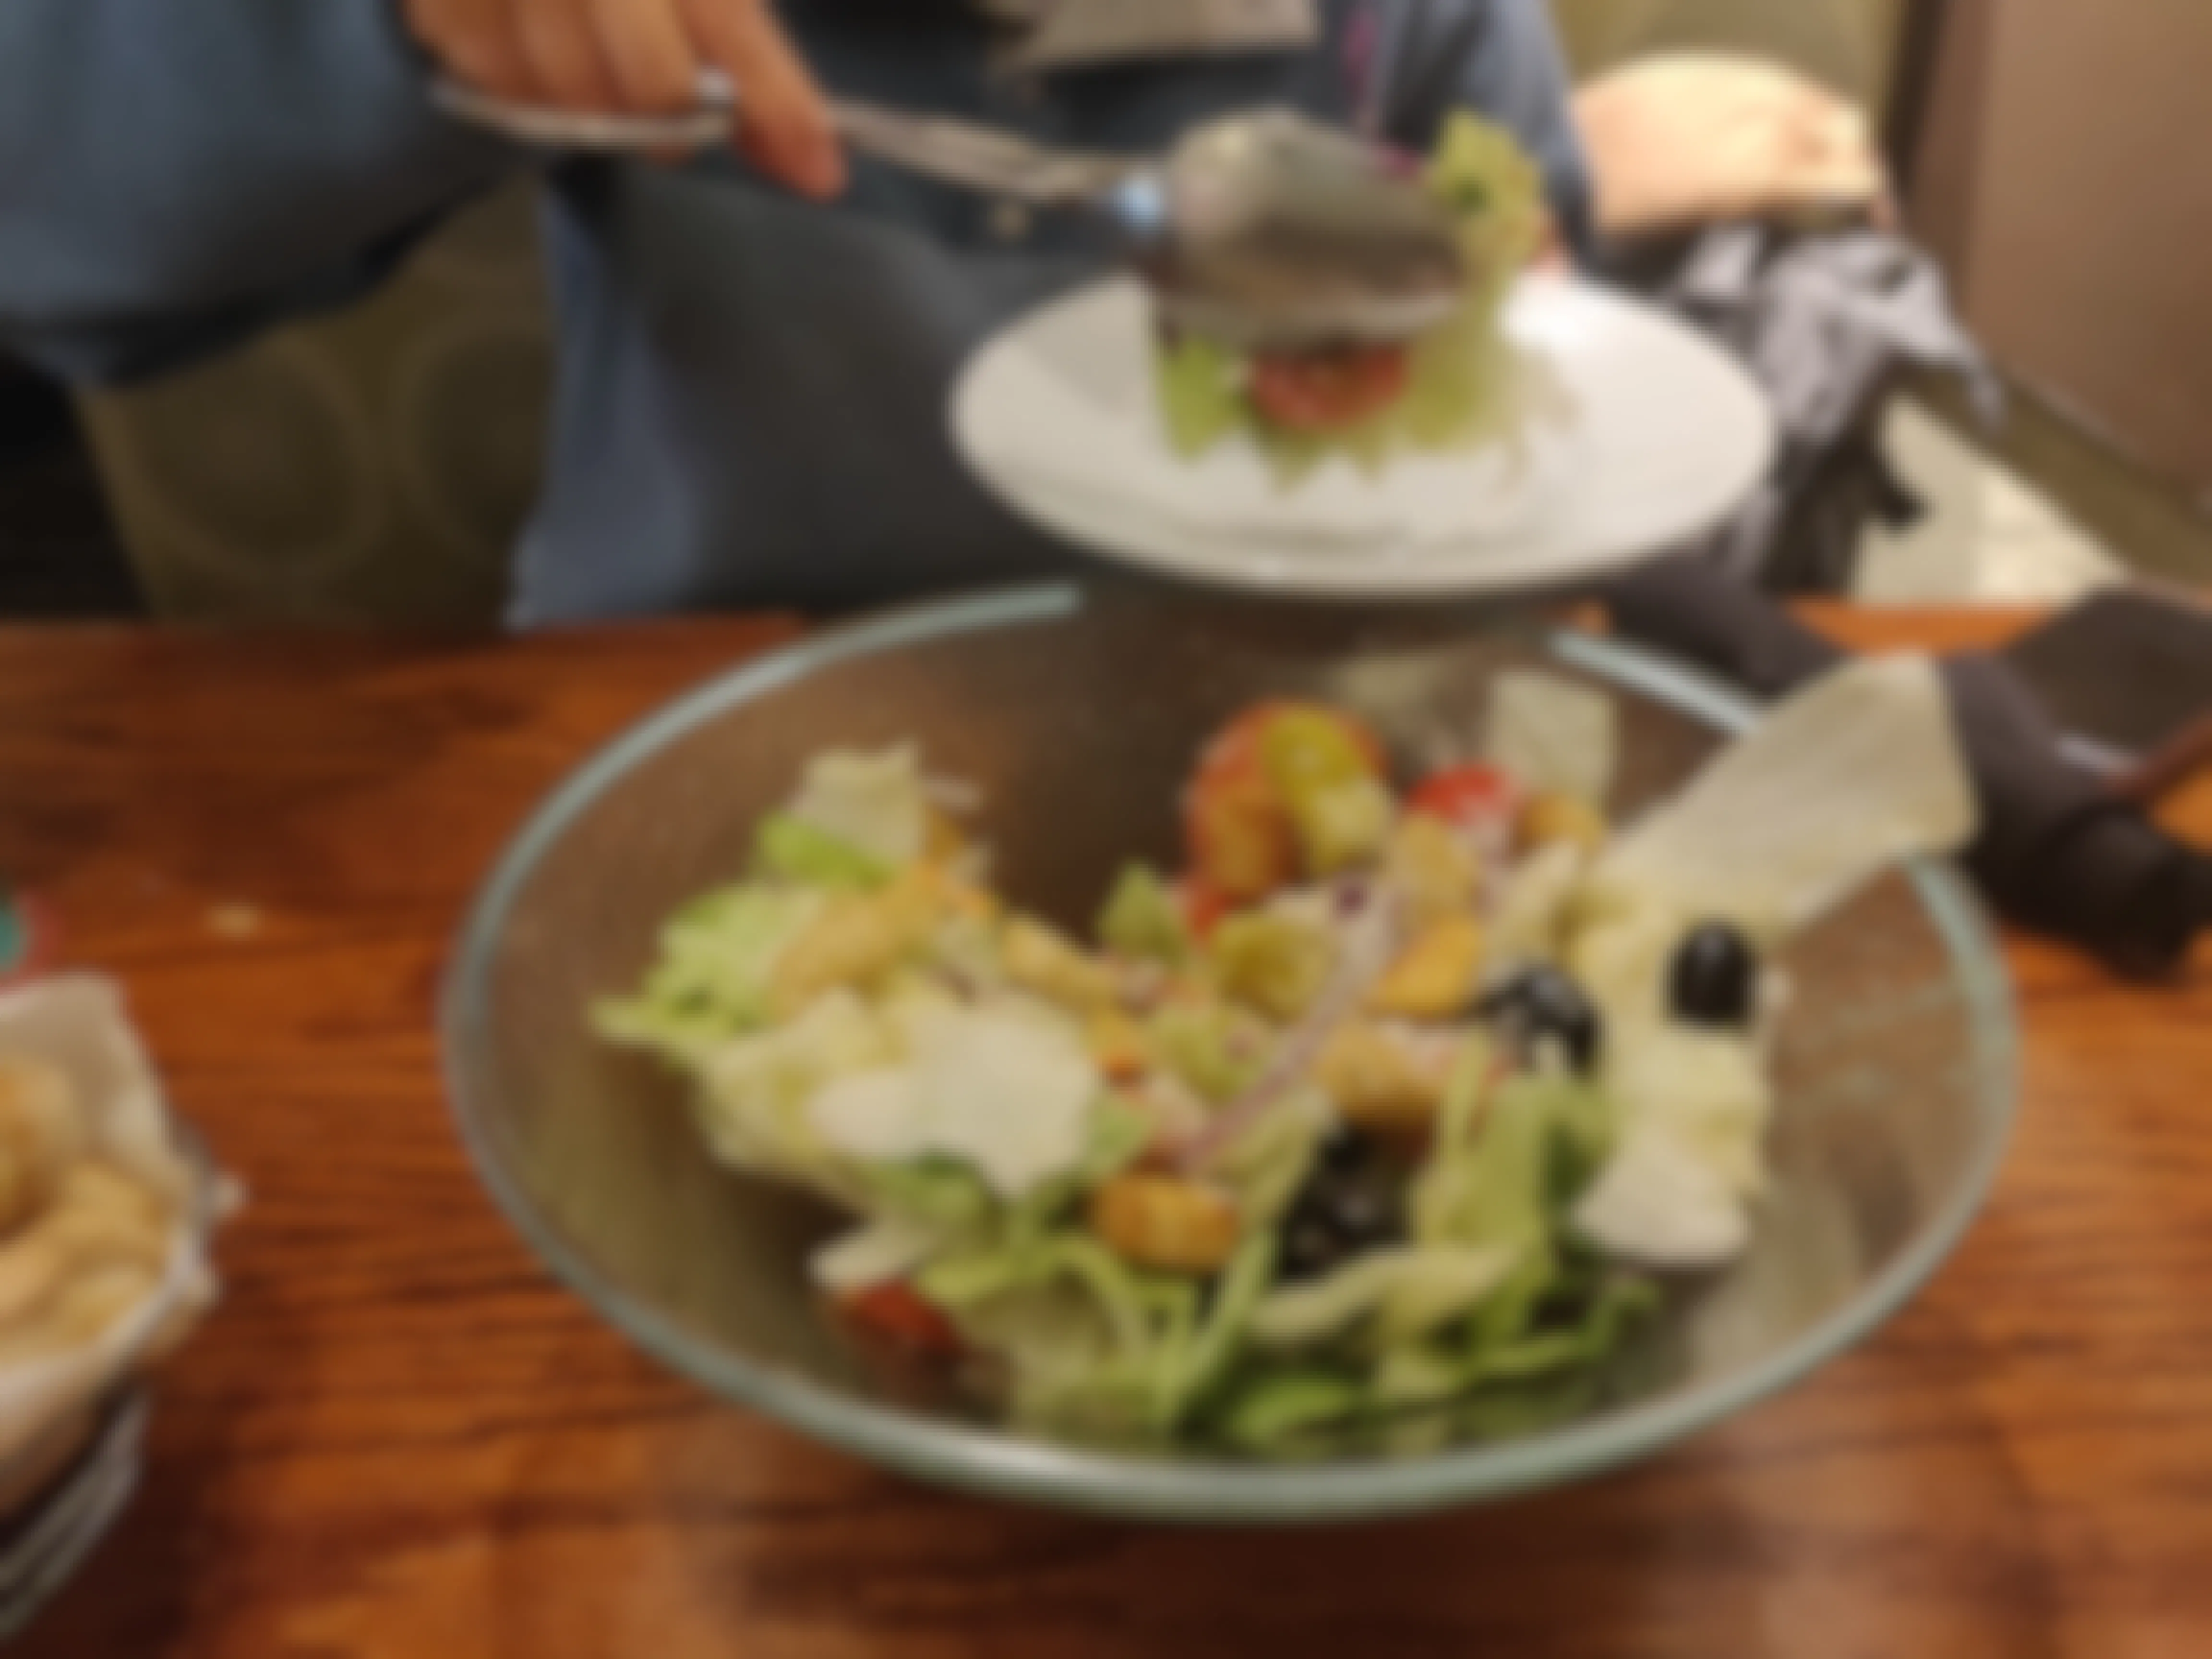 woman putting salad on her plate at olive garden